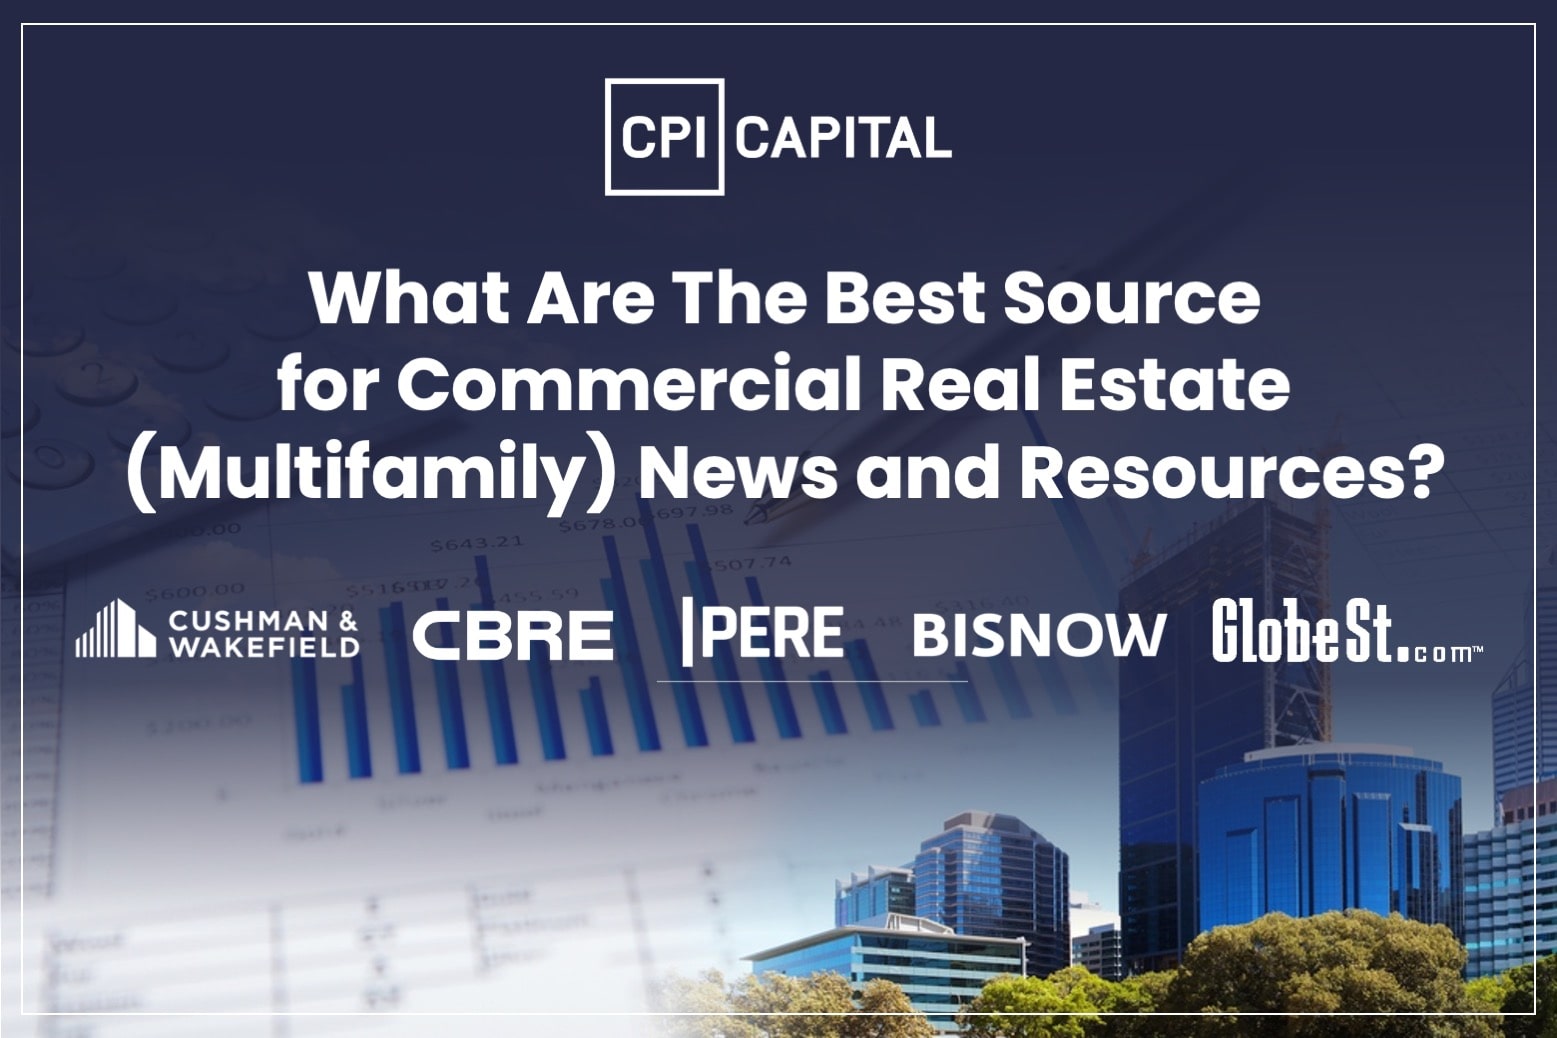 What are the Best Sources for Commercial Real Estate (Multifamily and BTR-SFR) News and Resources?